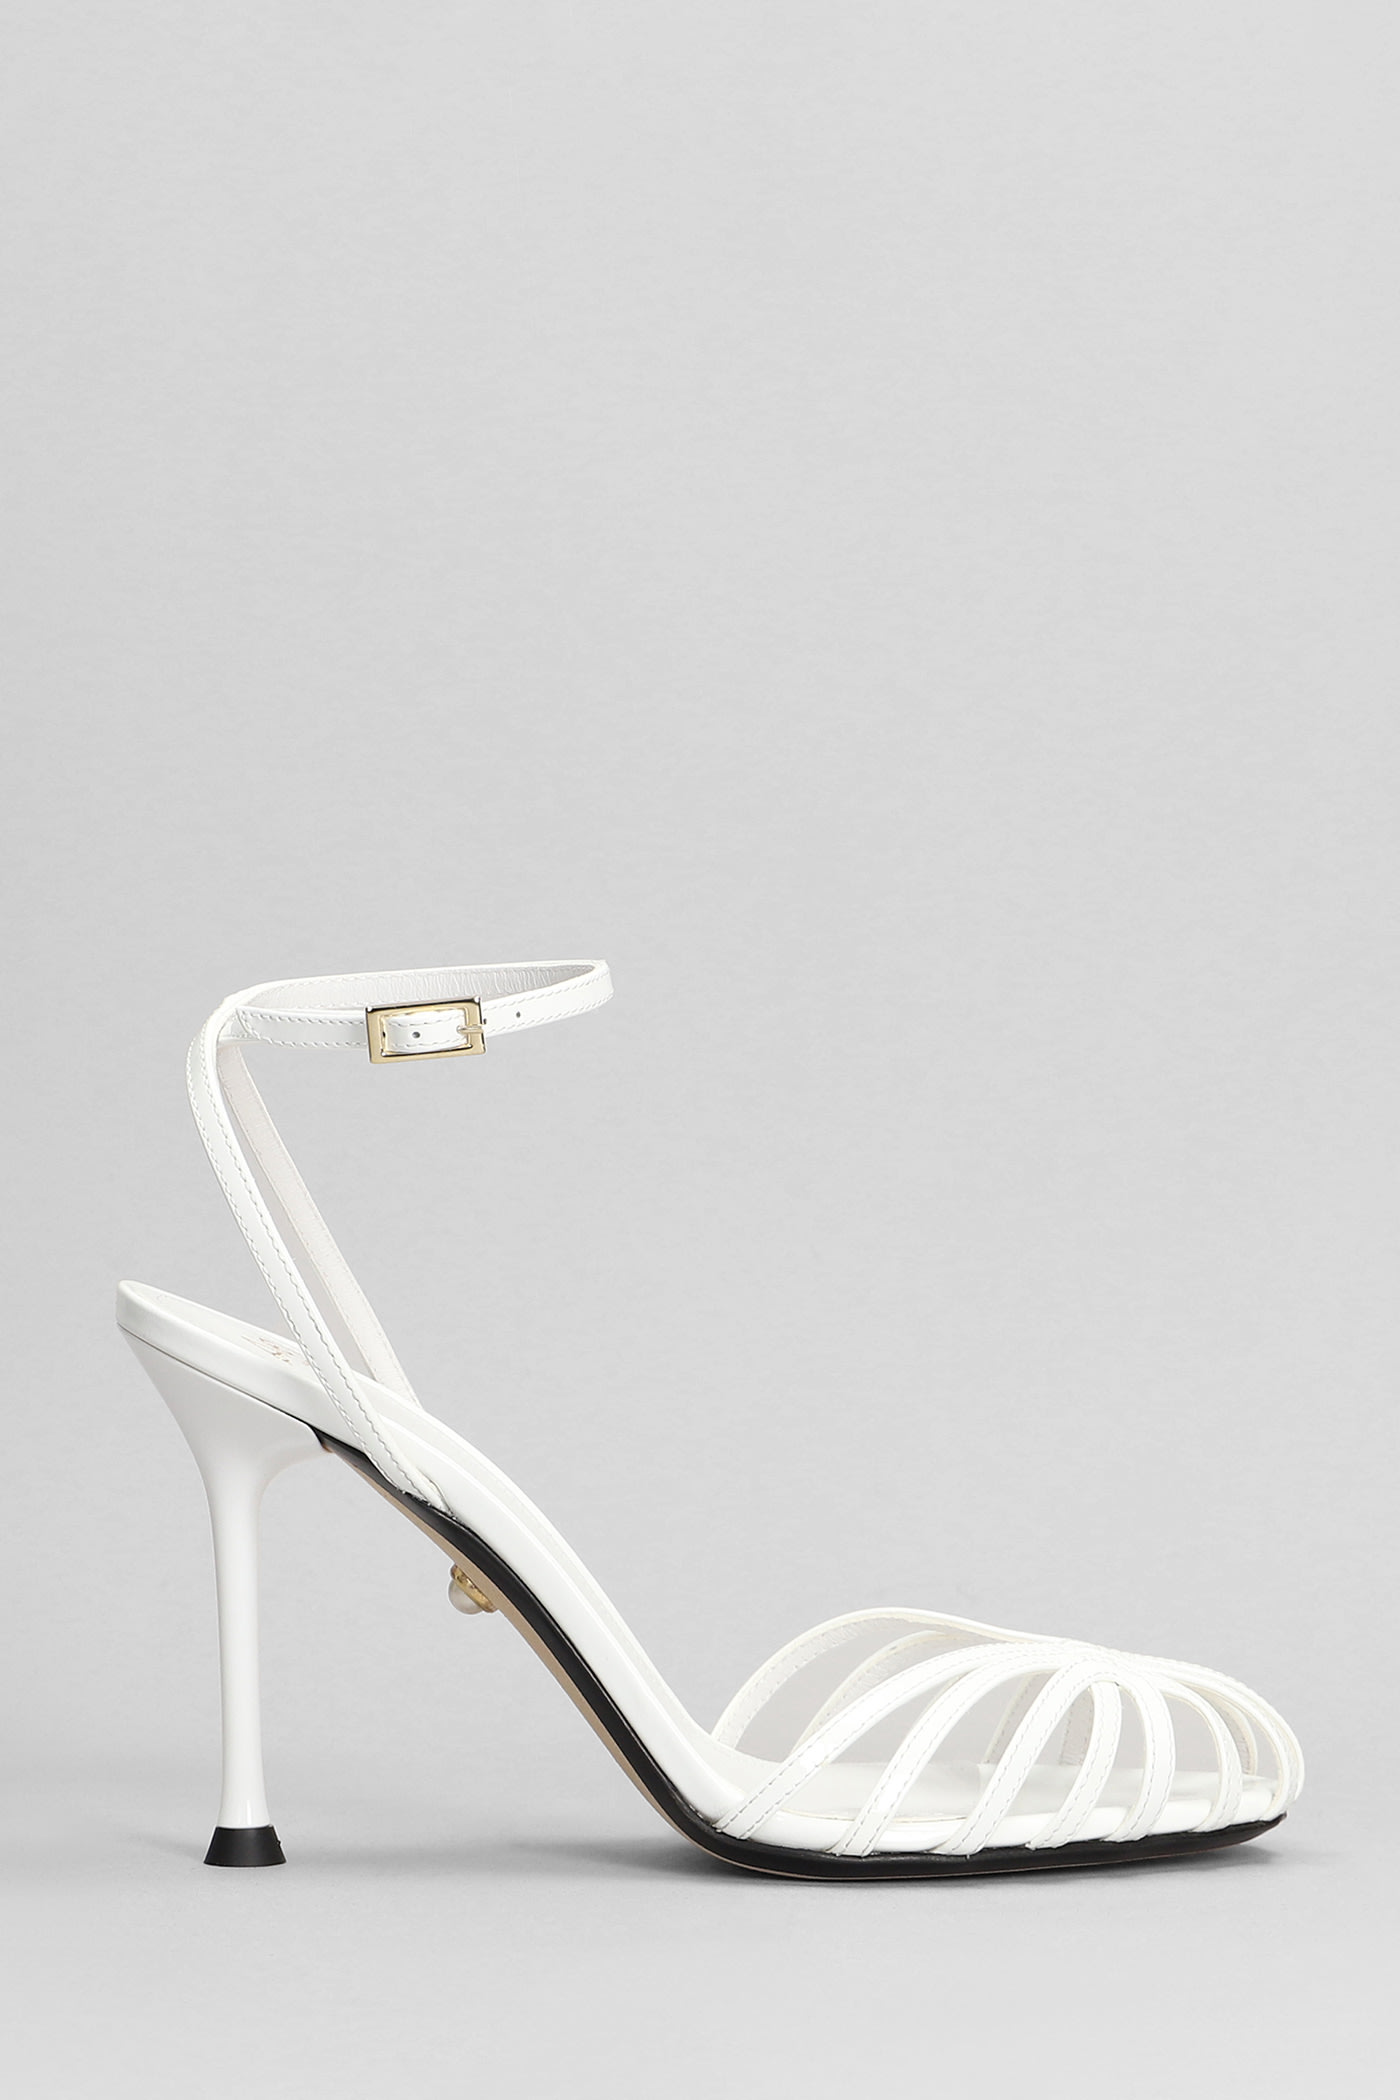 Alevì Ally 095 Sandals In White Patent Leather